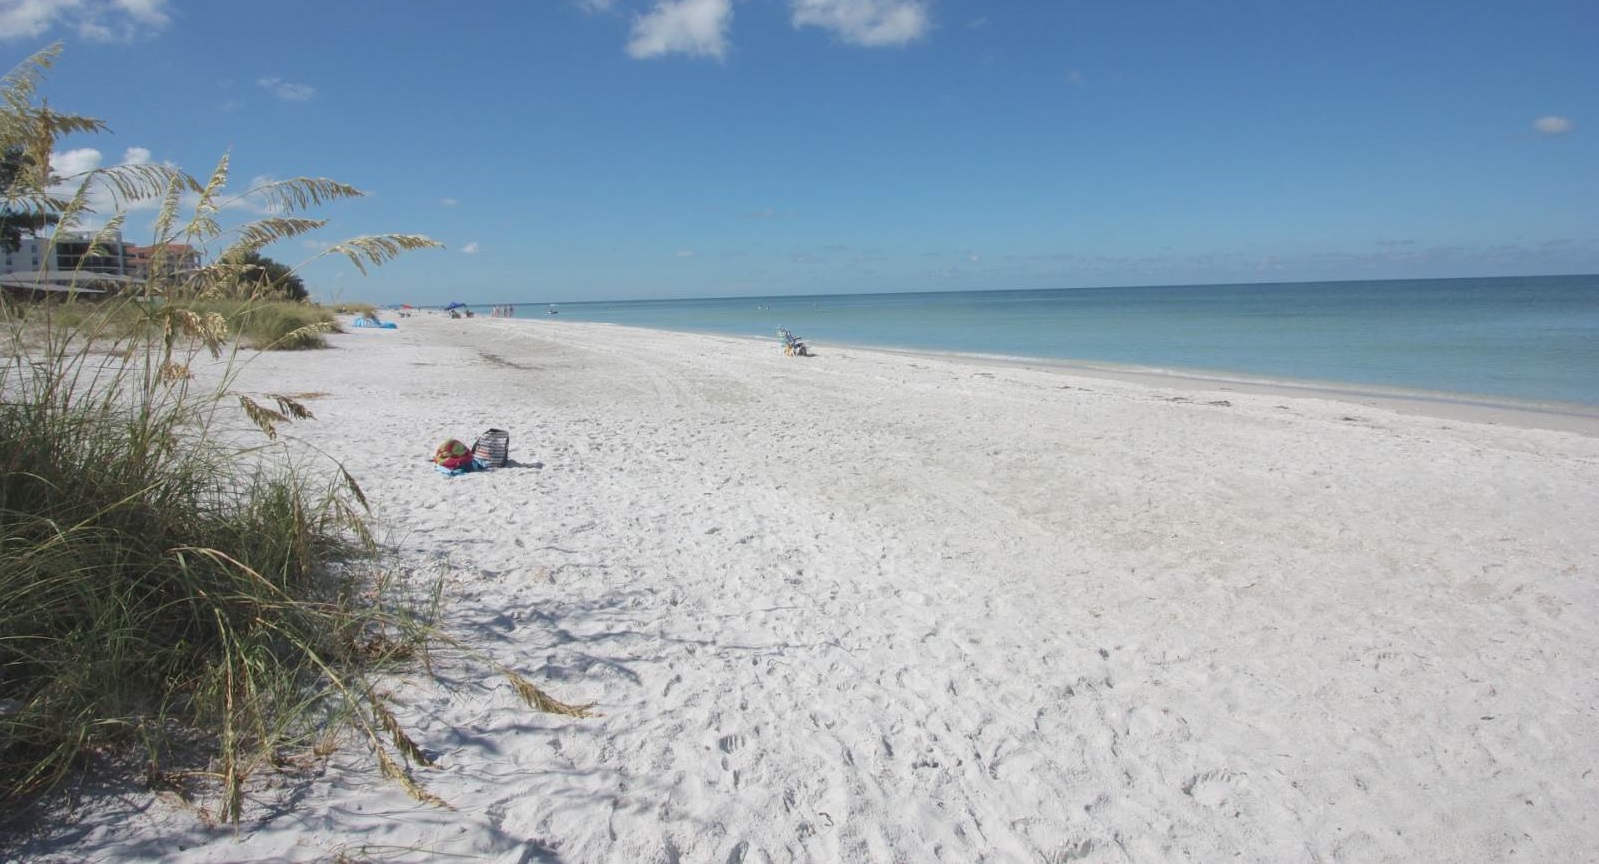 Indian Shores Outdoor Attractions: 7 Musts for Florida Natural Beauty